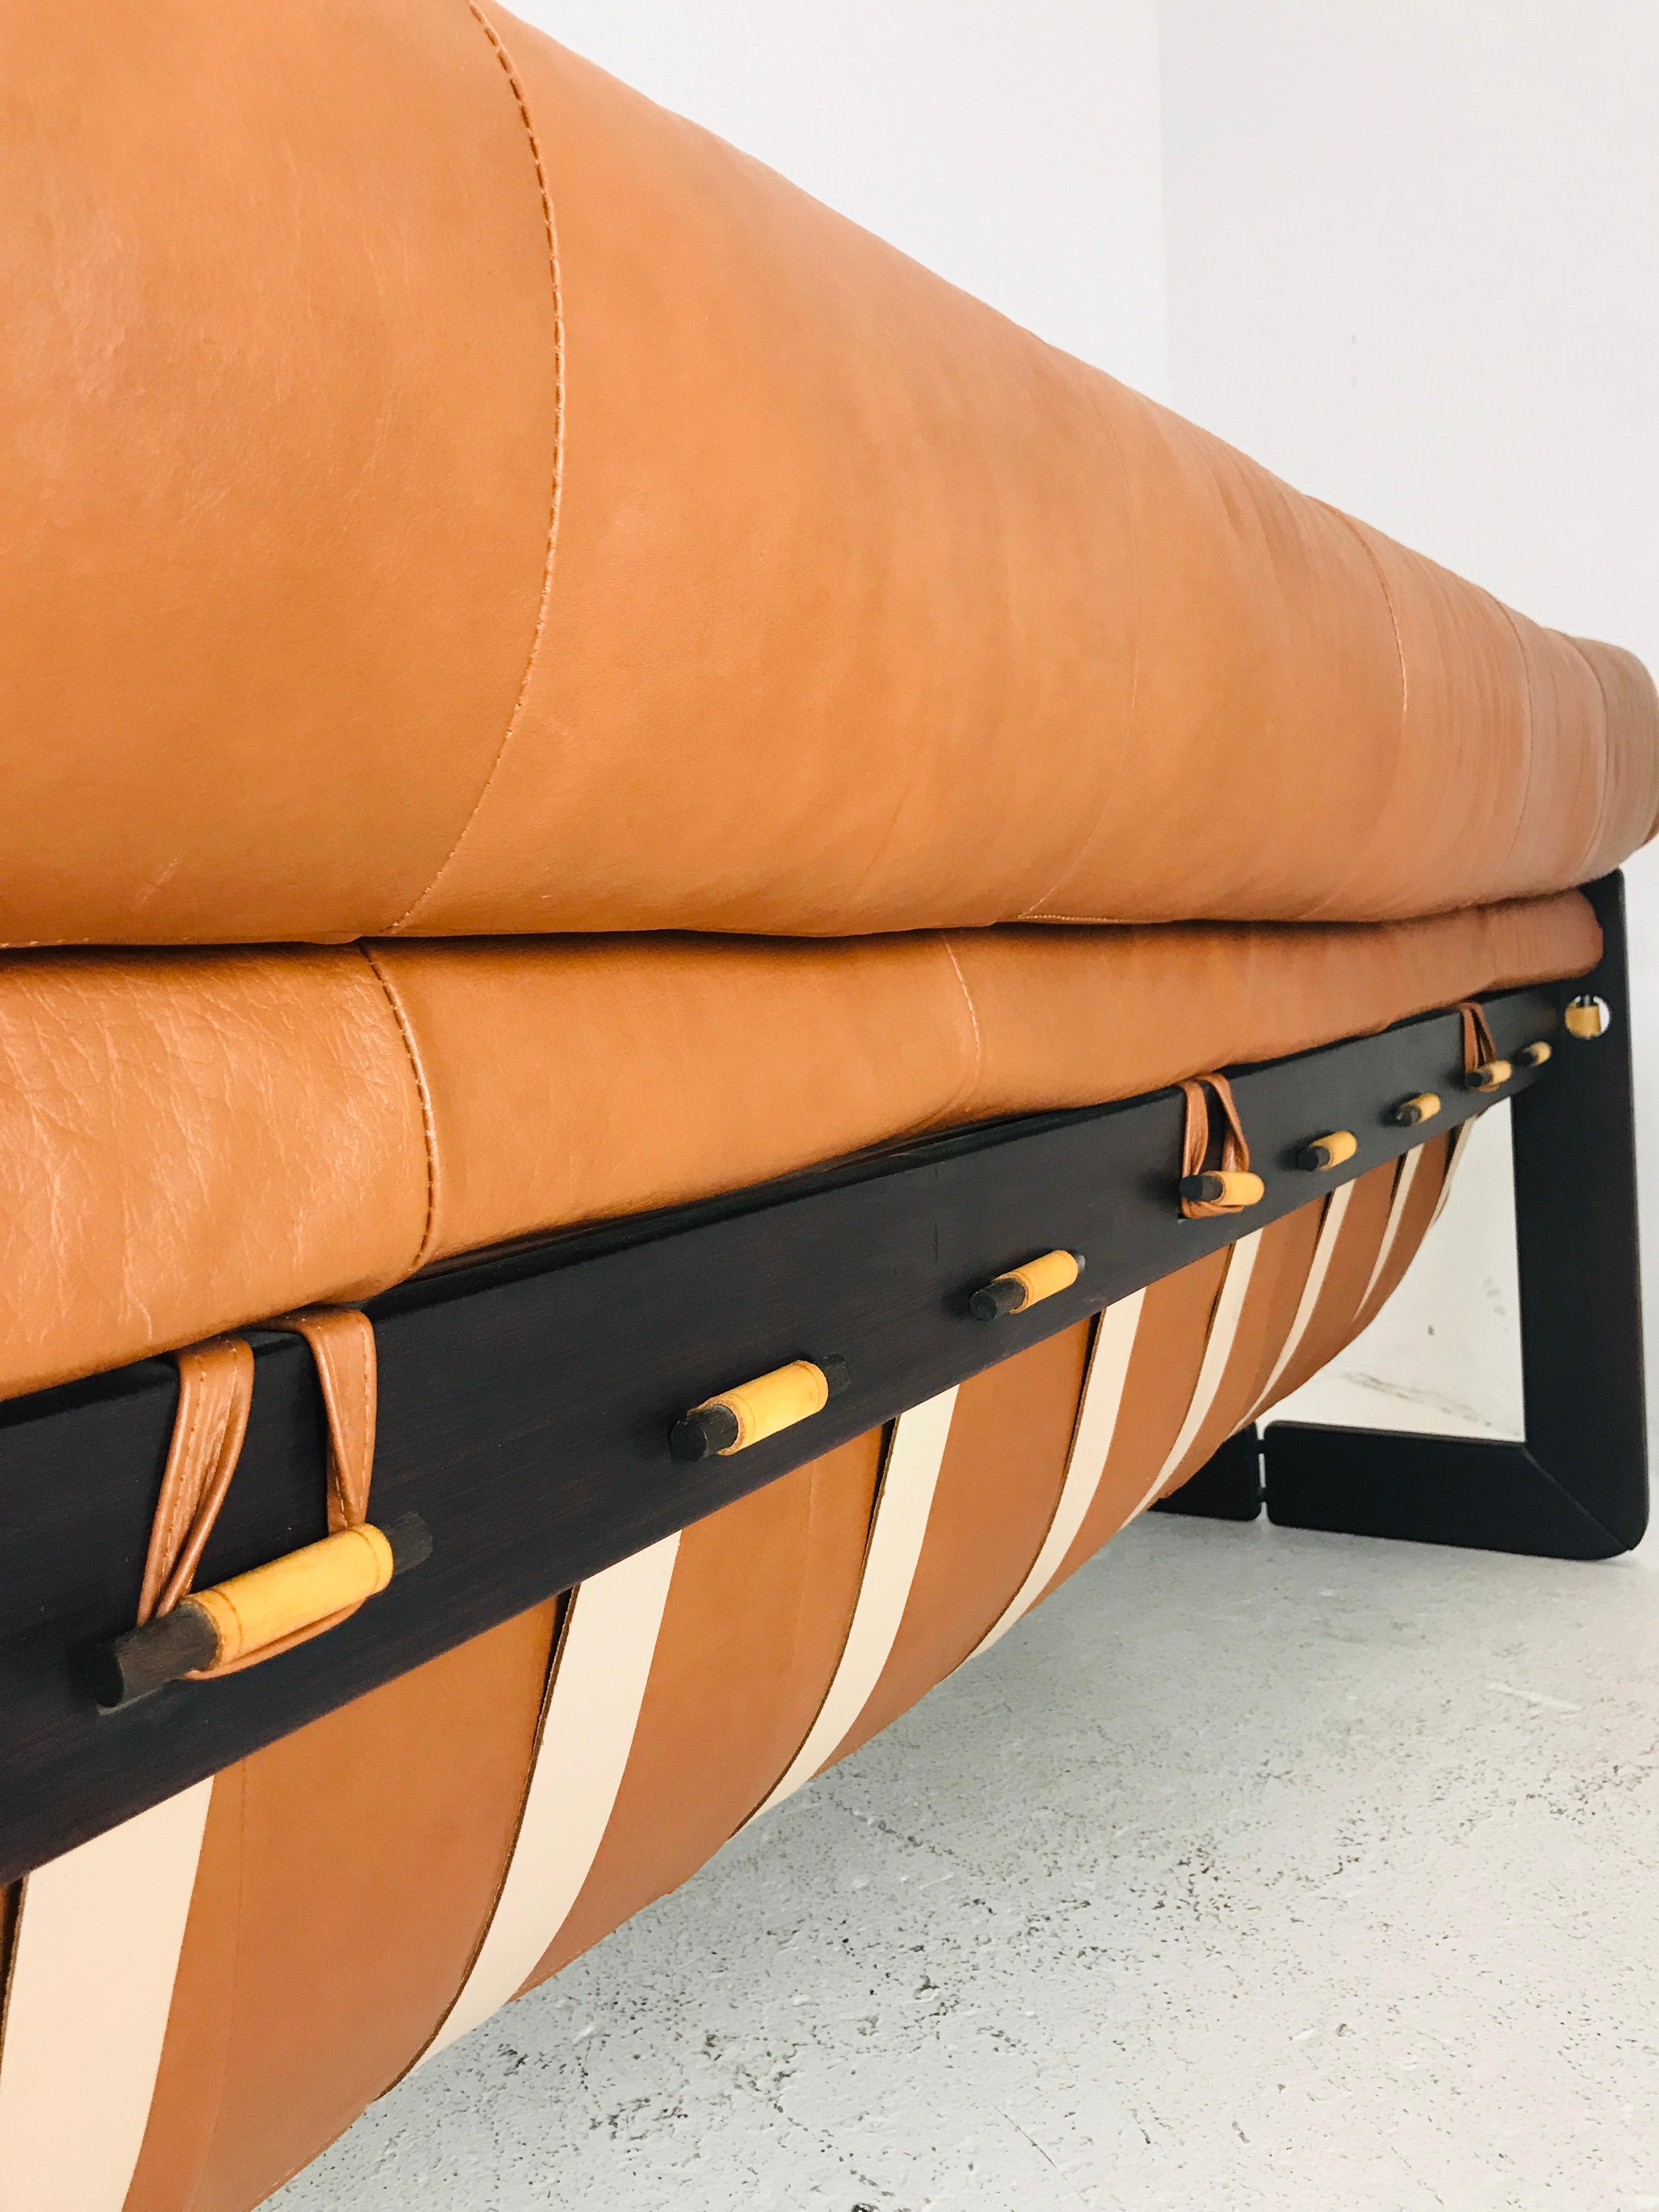 Percival Lafer Leather and Wood Sofa 3